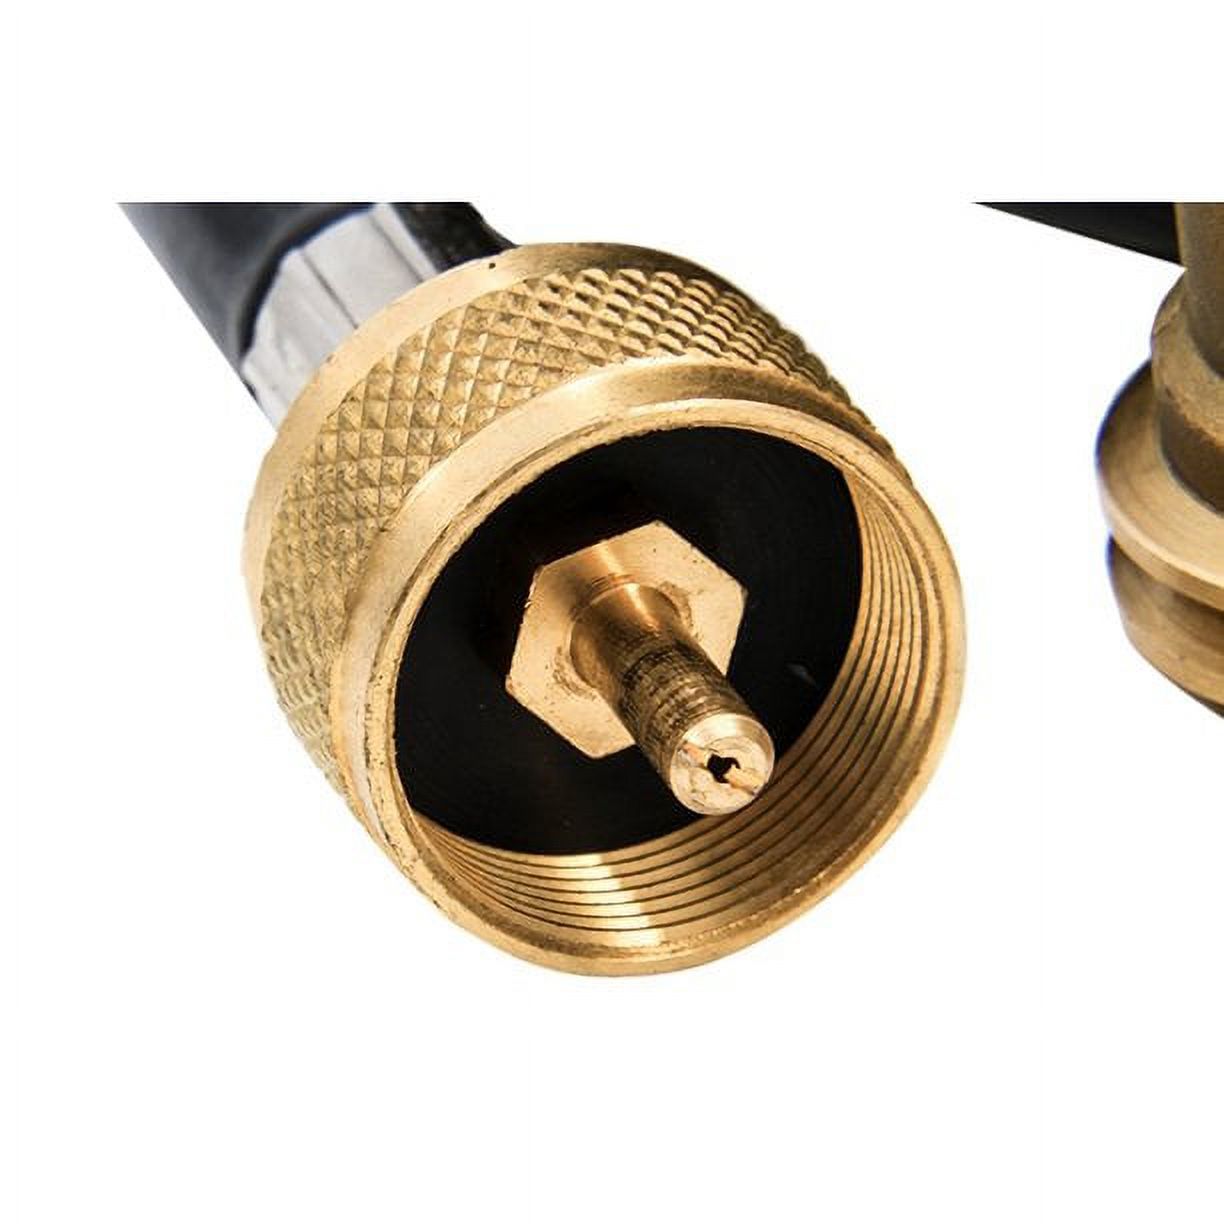 Camco Camper/RV Propane 3-Port Brass Tee with 12-Ft Propane Hose | Includes a Female POL, Excess Flow Soft Nose POL & 1"-20 Male Throwaway Cylinder Thread (59103) - image 1 of 10